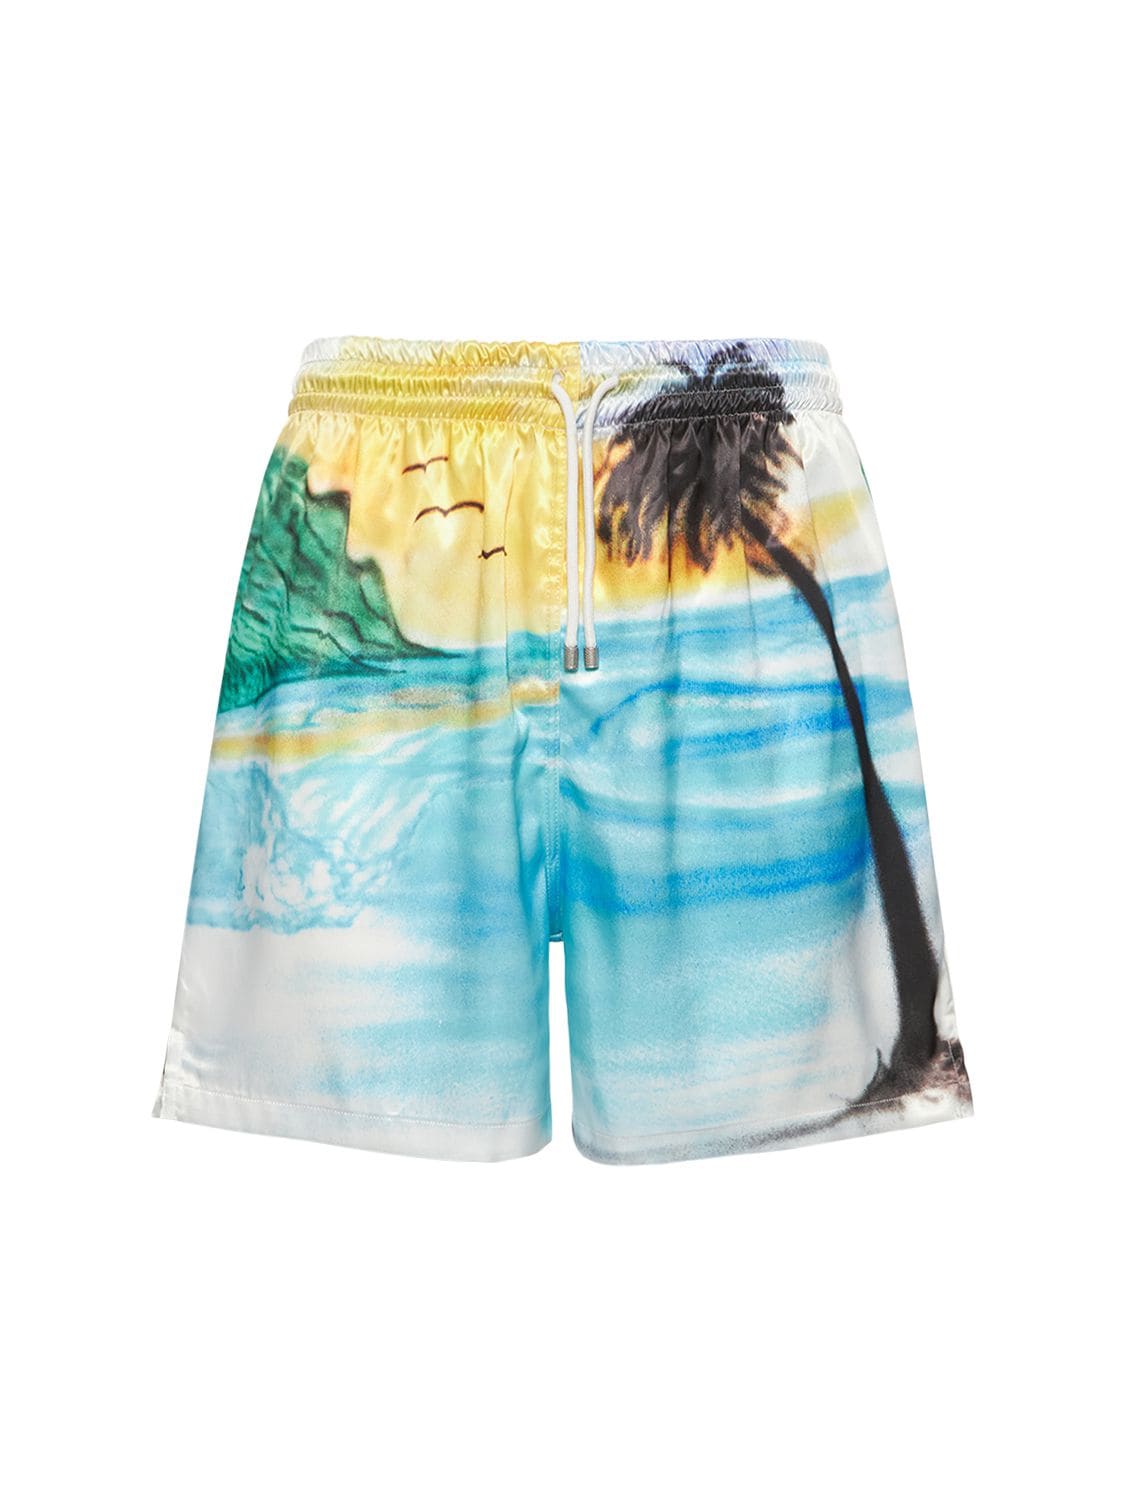 FLANEUR HOMME Airbrushed Print Satin Shorts